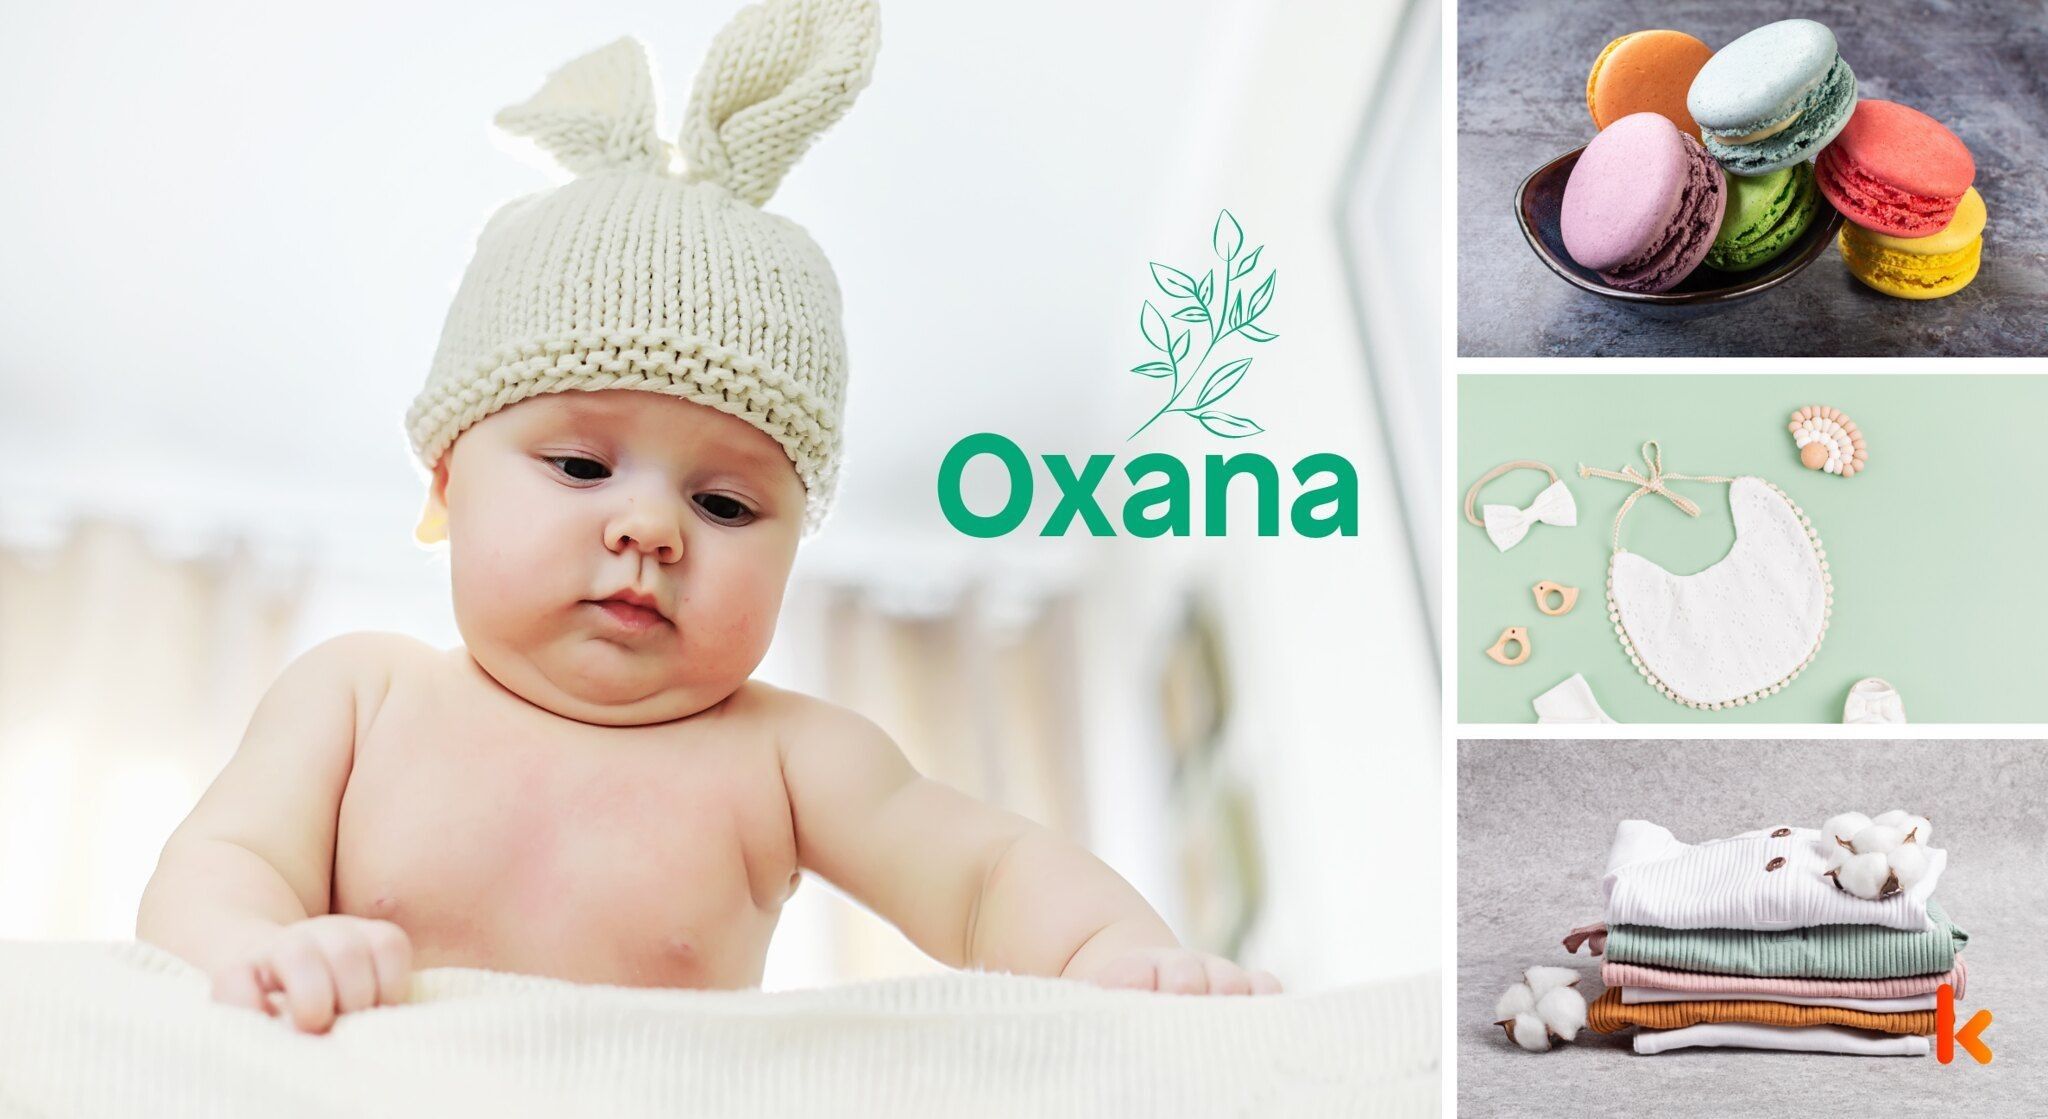 Meaning of the name Oxana